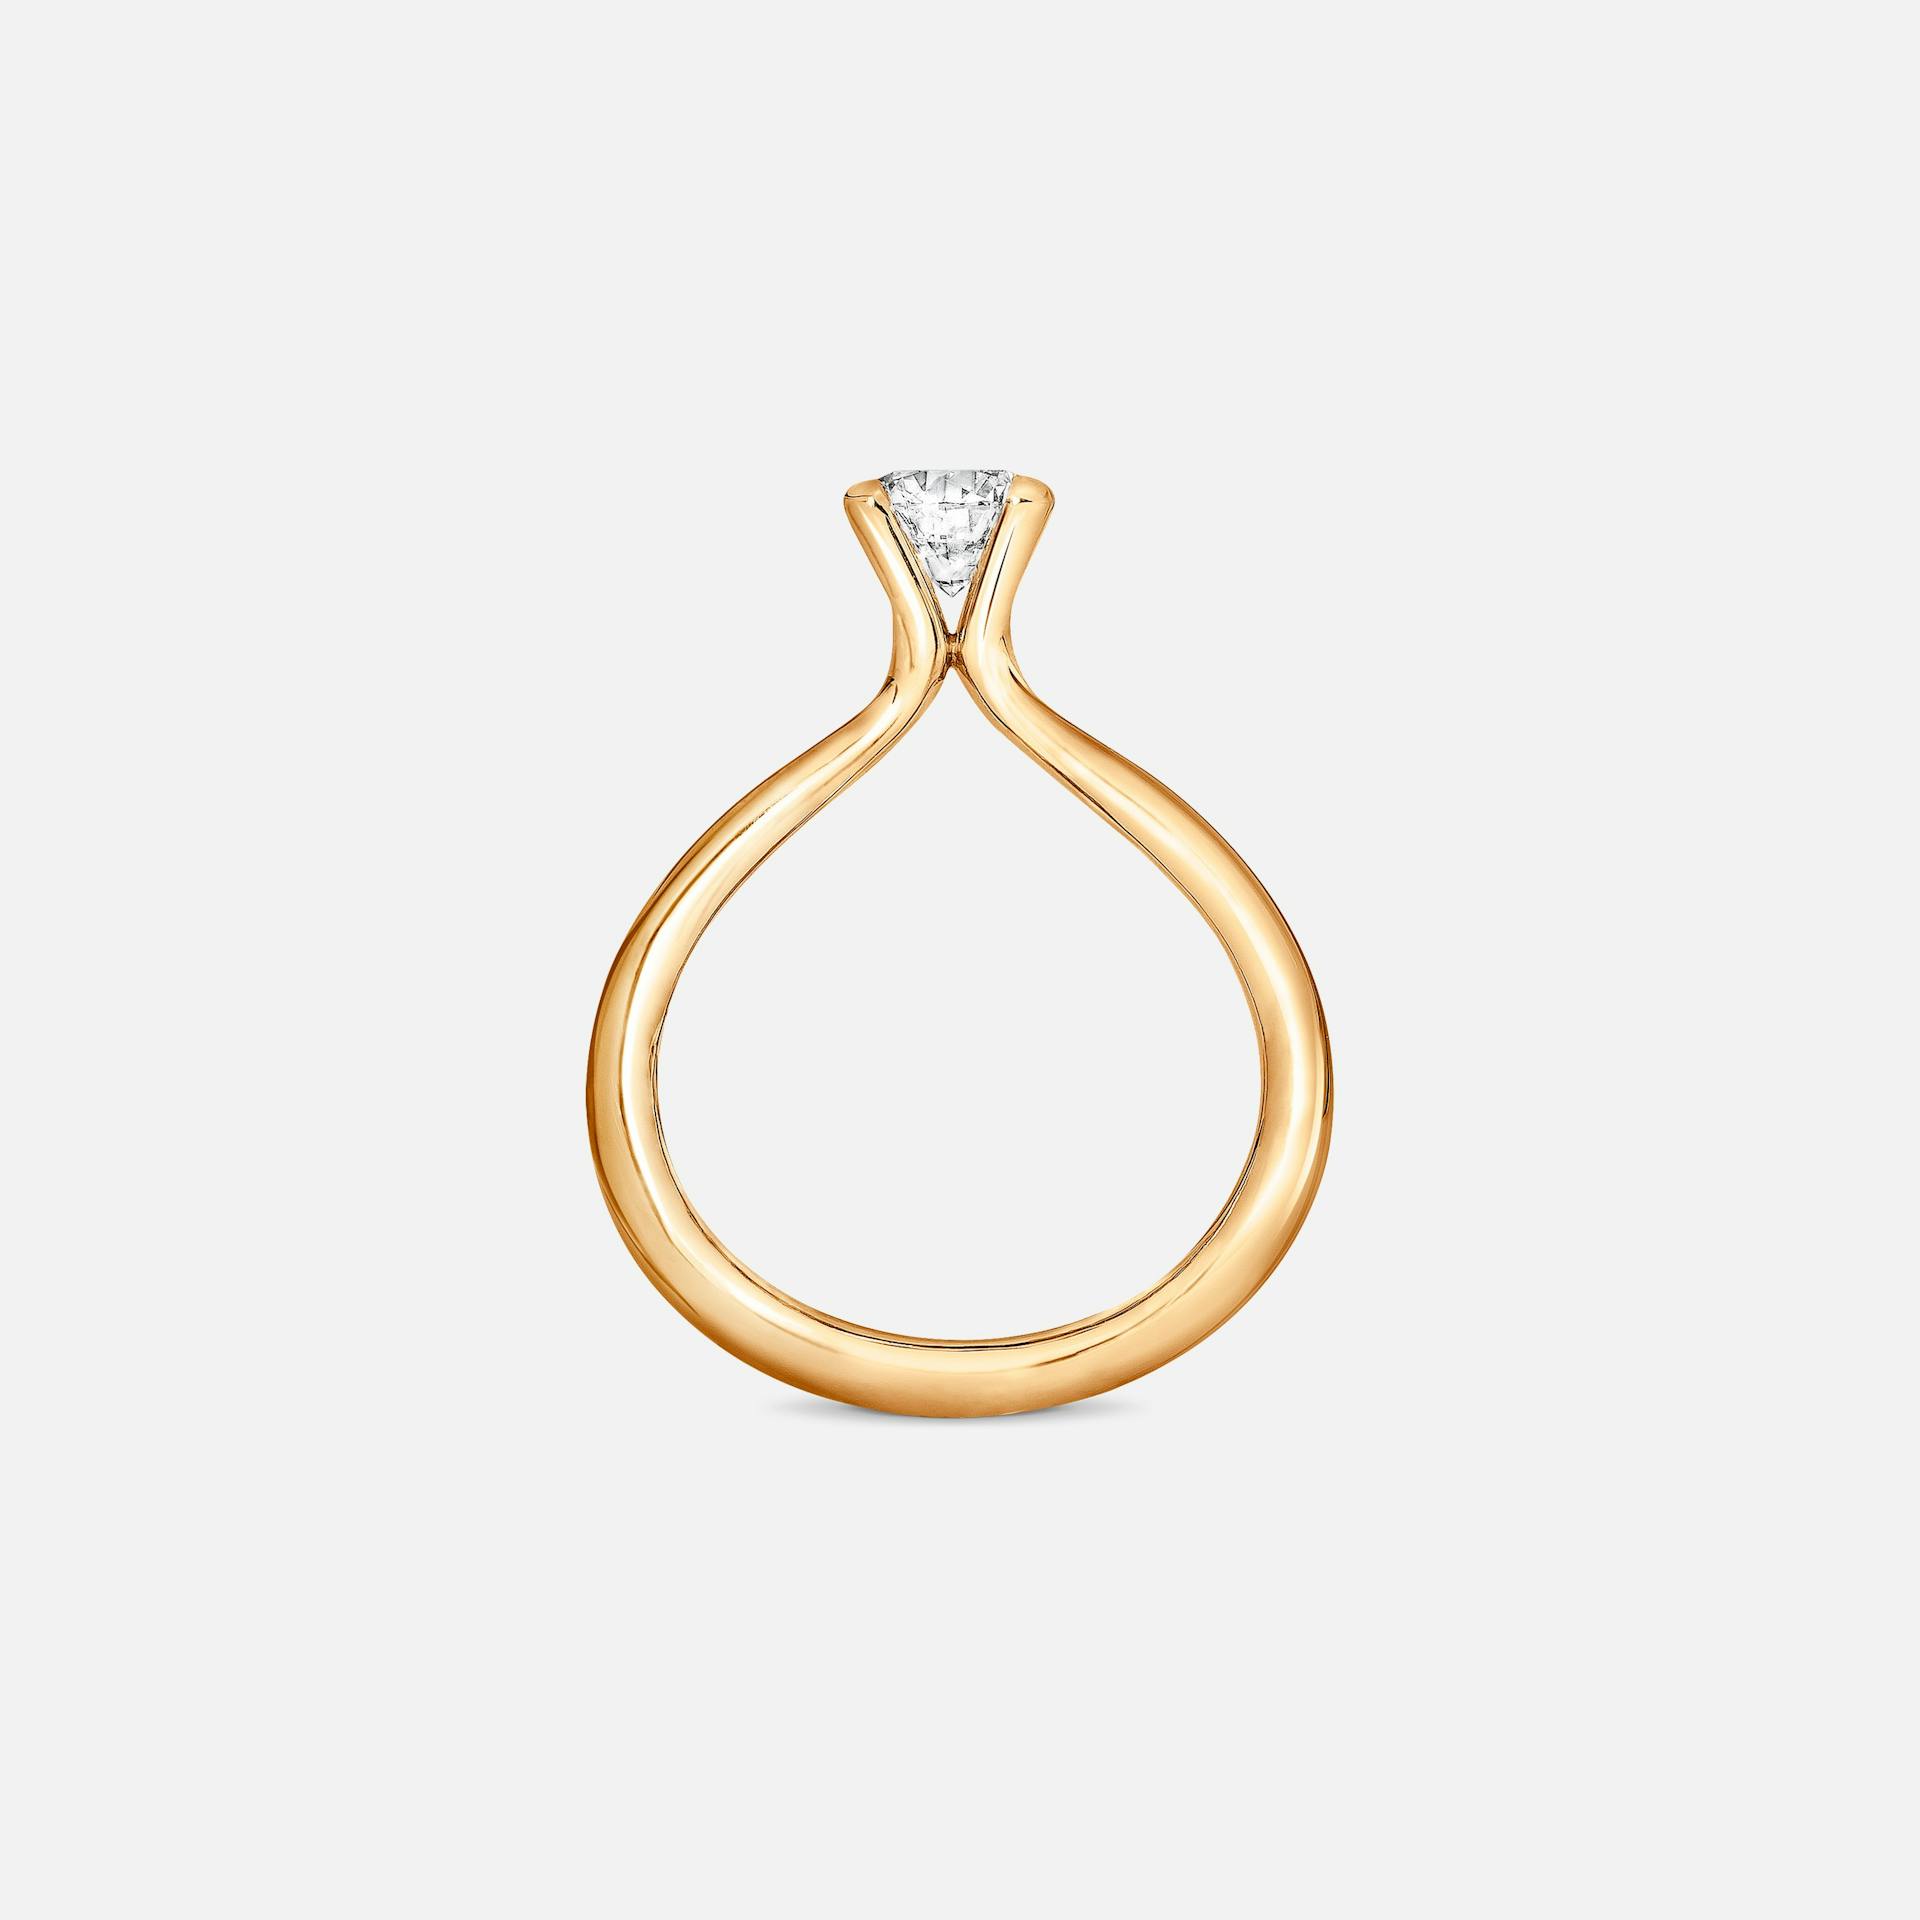 Solitaire necklace 18k gold set with a brilliant-cut diamond from 0.30 ct. TW. VS.

